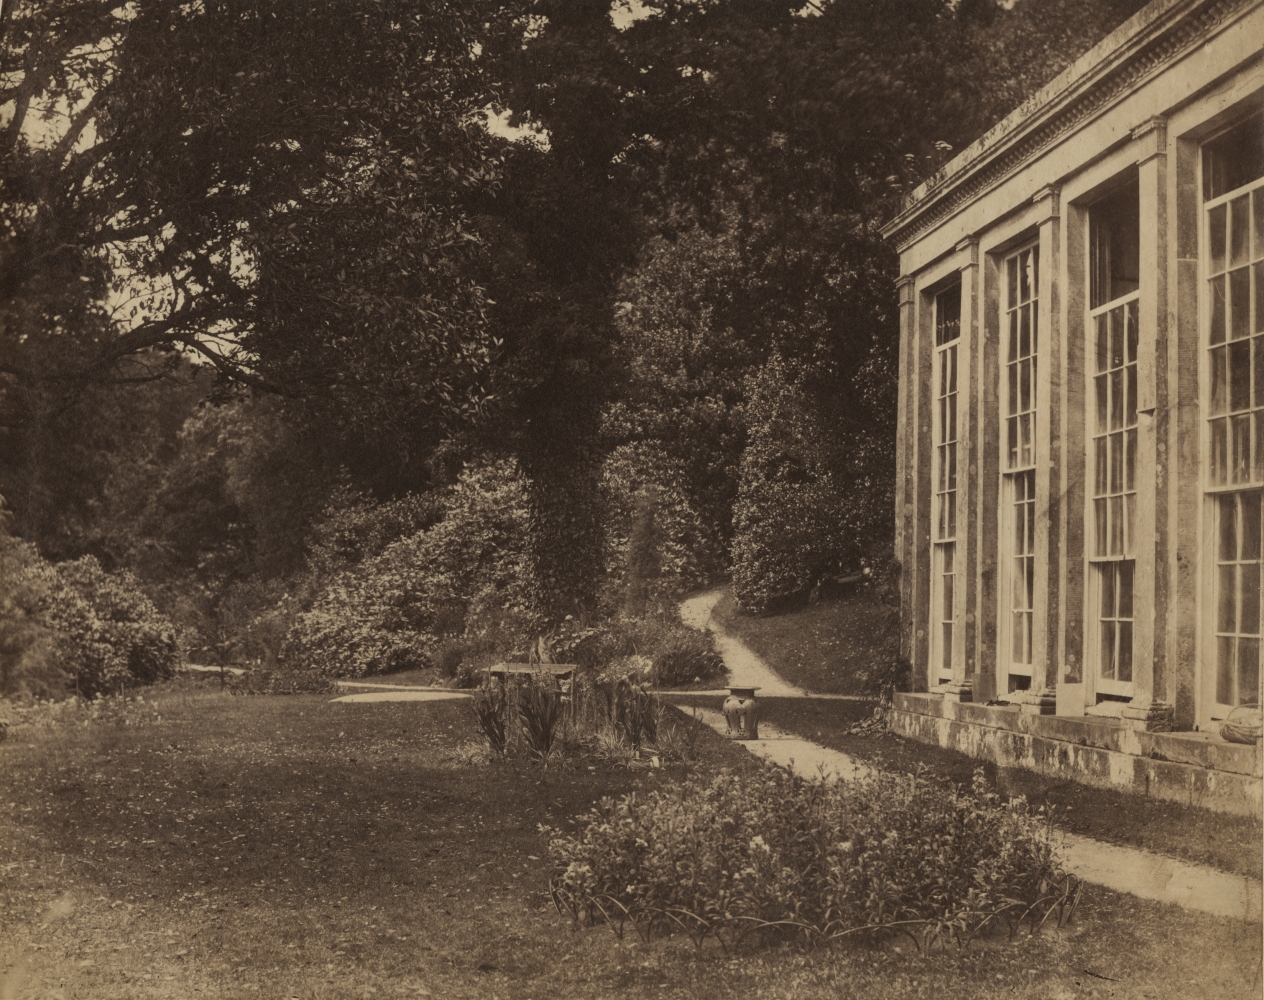 John Dillwyn LLEWELYN (Welsh, 1810-1882) The Orangery at Penrice, seat of Christopher Rice Mansel Talbot, MP, circa 1854 Albumen print from a collodion negative 19.0 x 24.2 cm